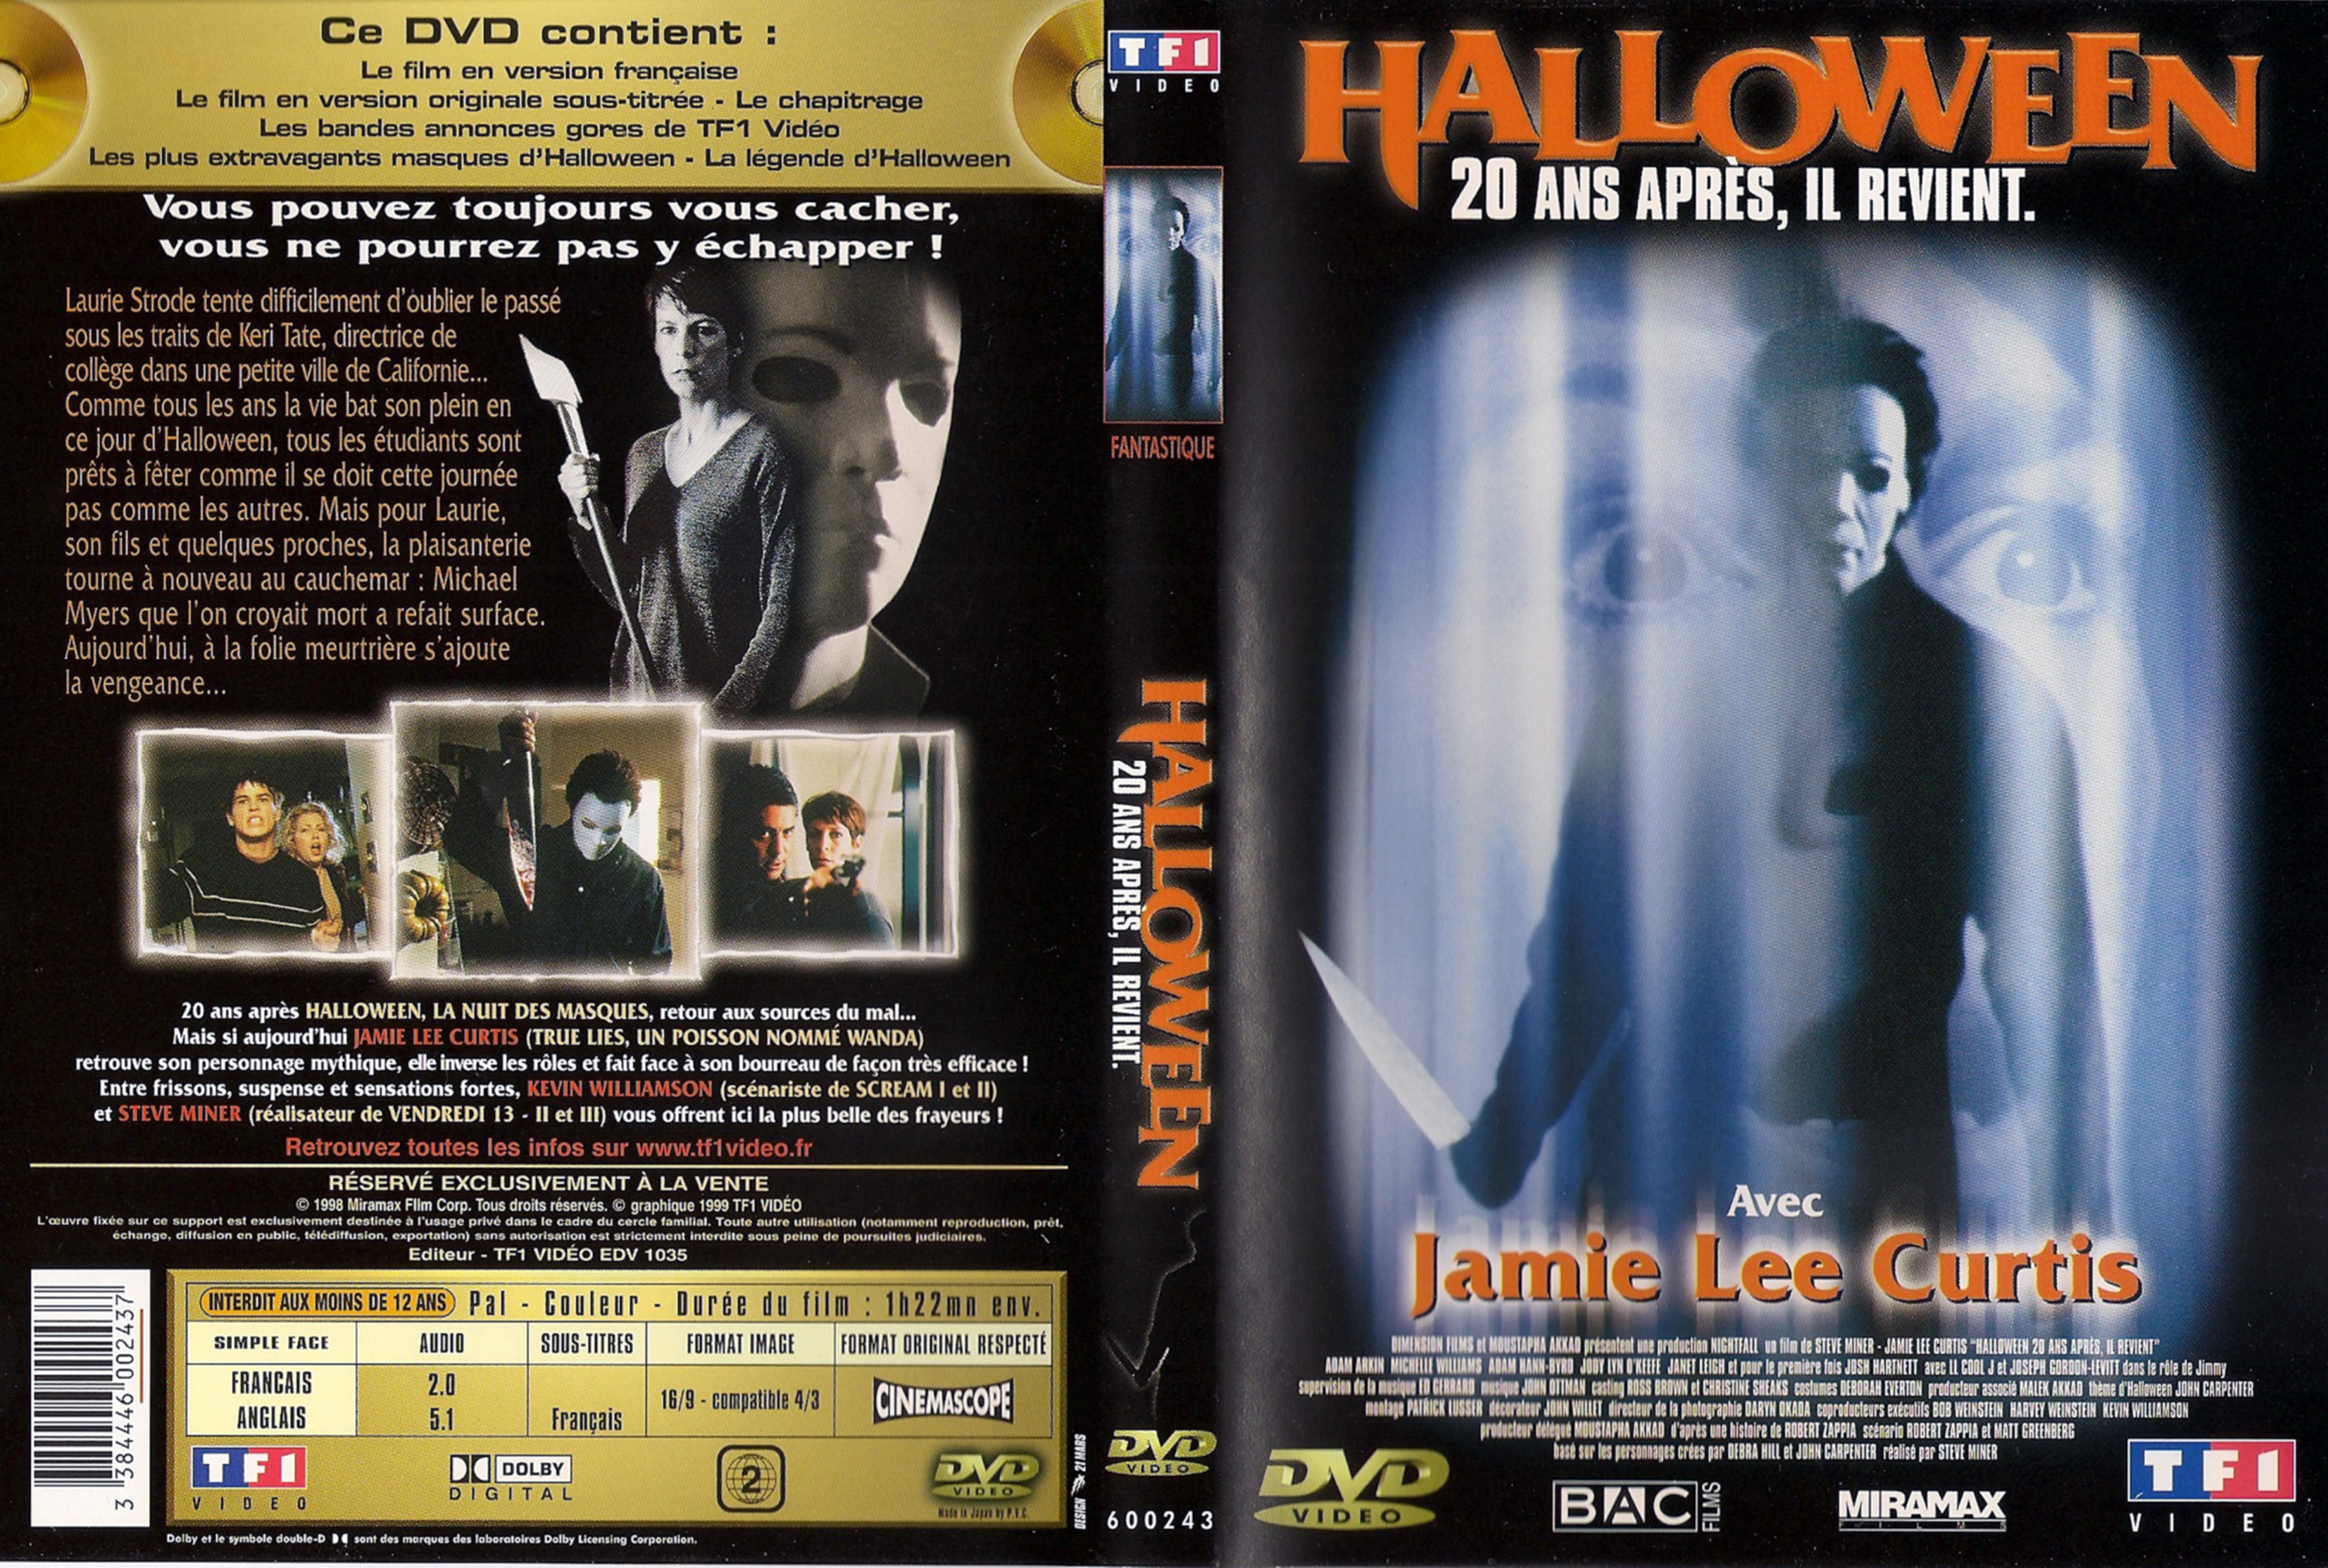 Jaquette DVD Halloween 20 ans aprs v2